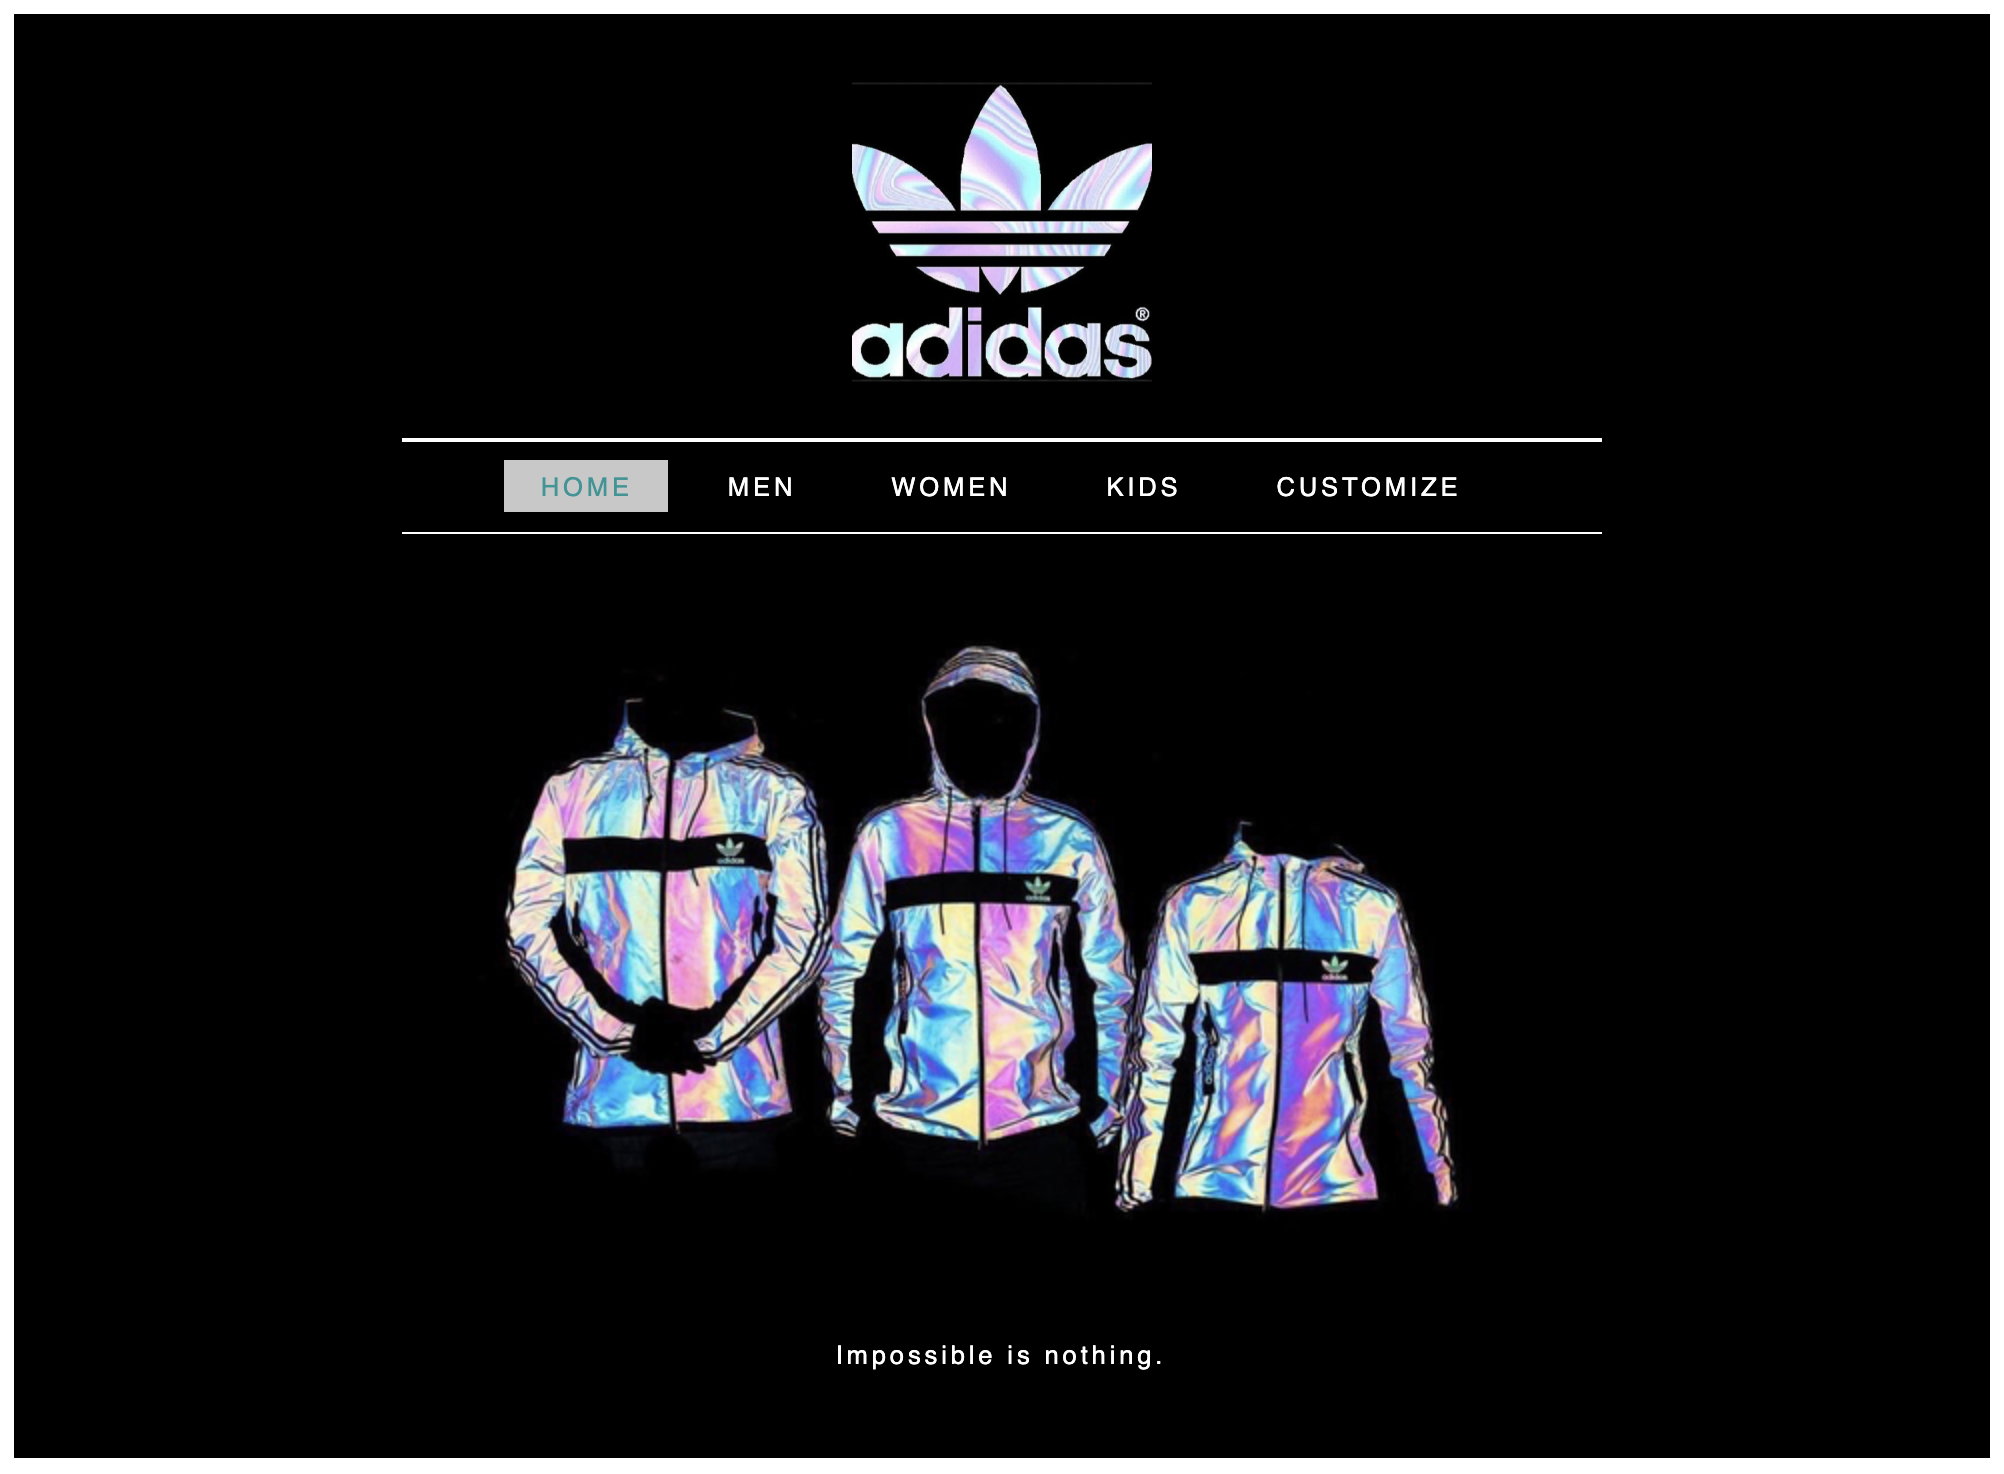 This is a mockup website for Adidas